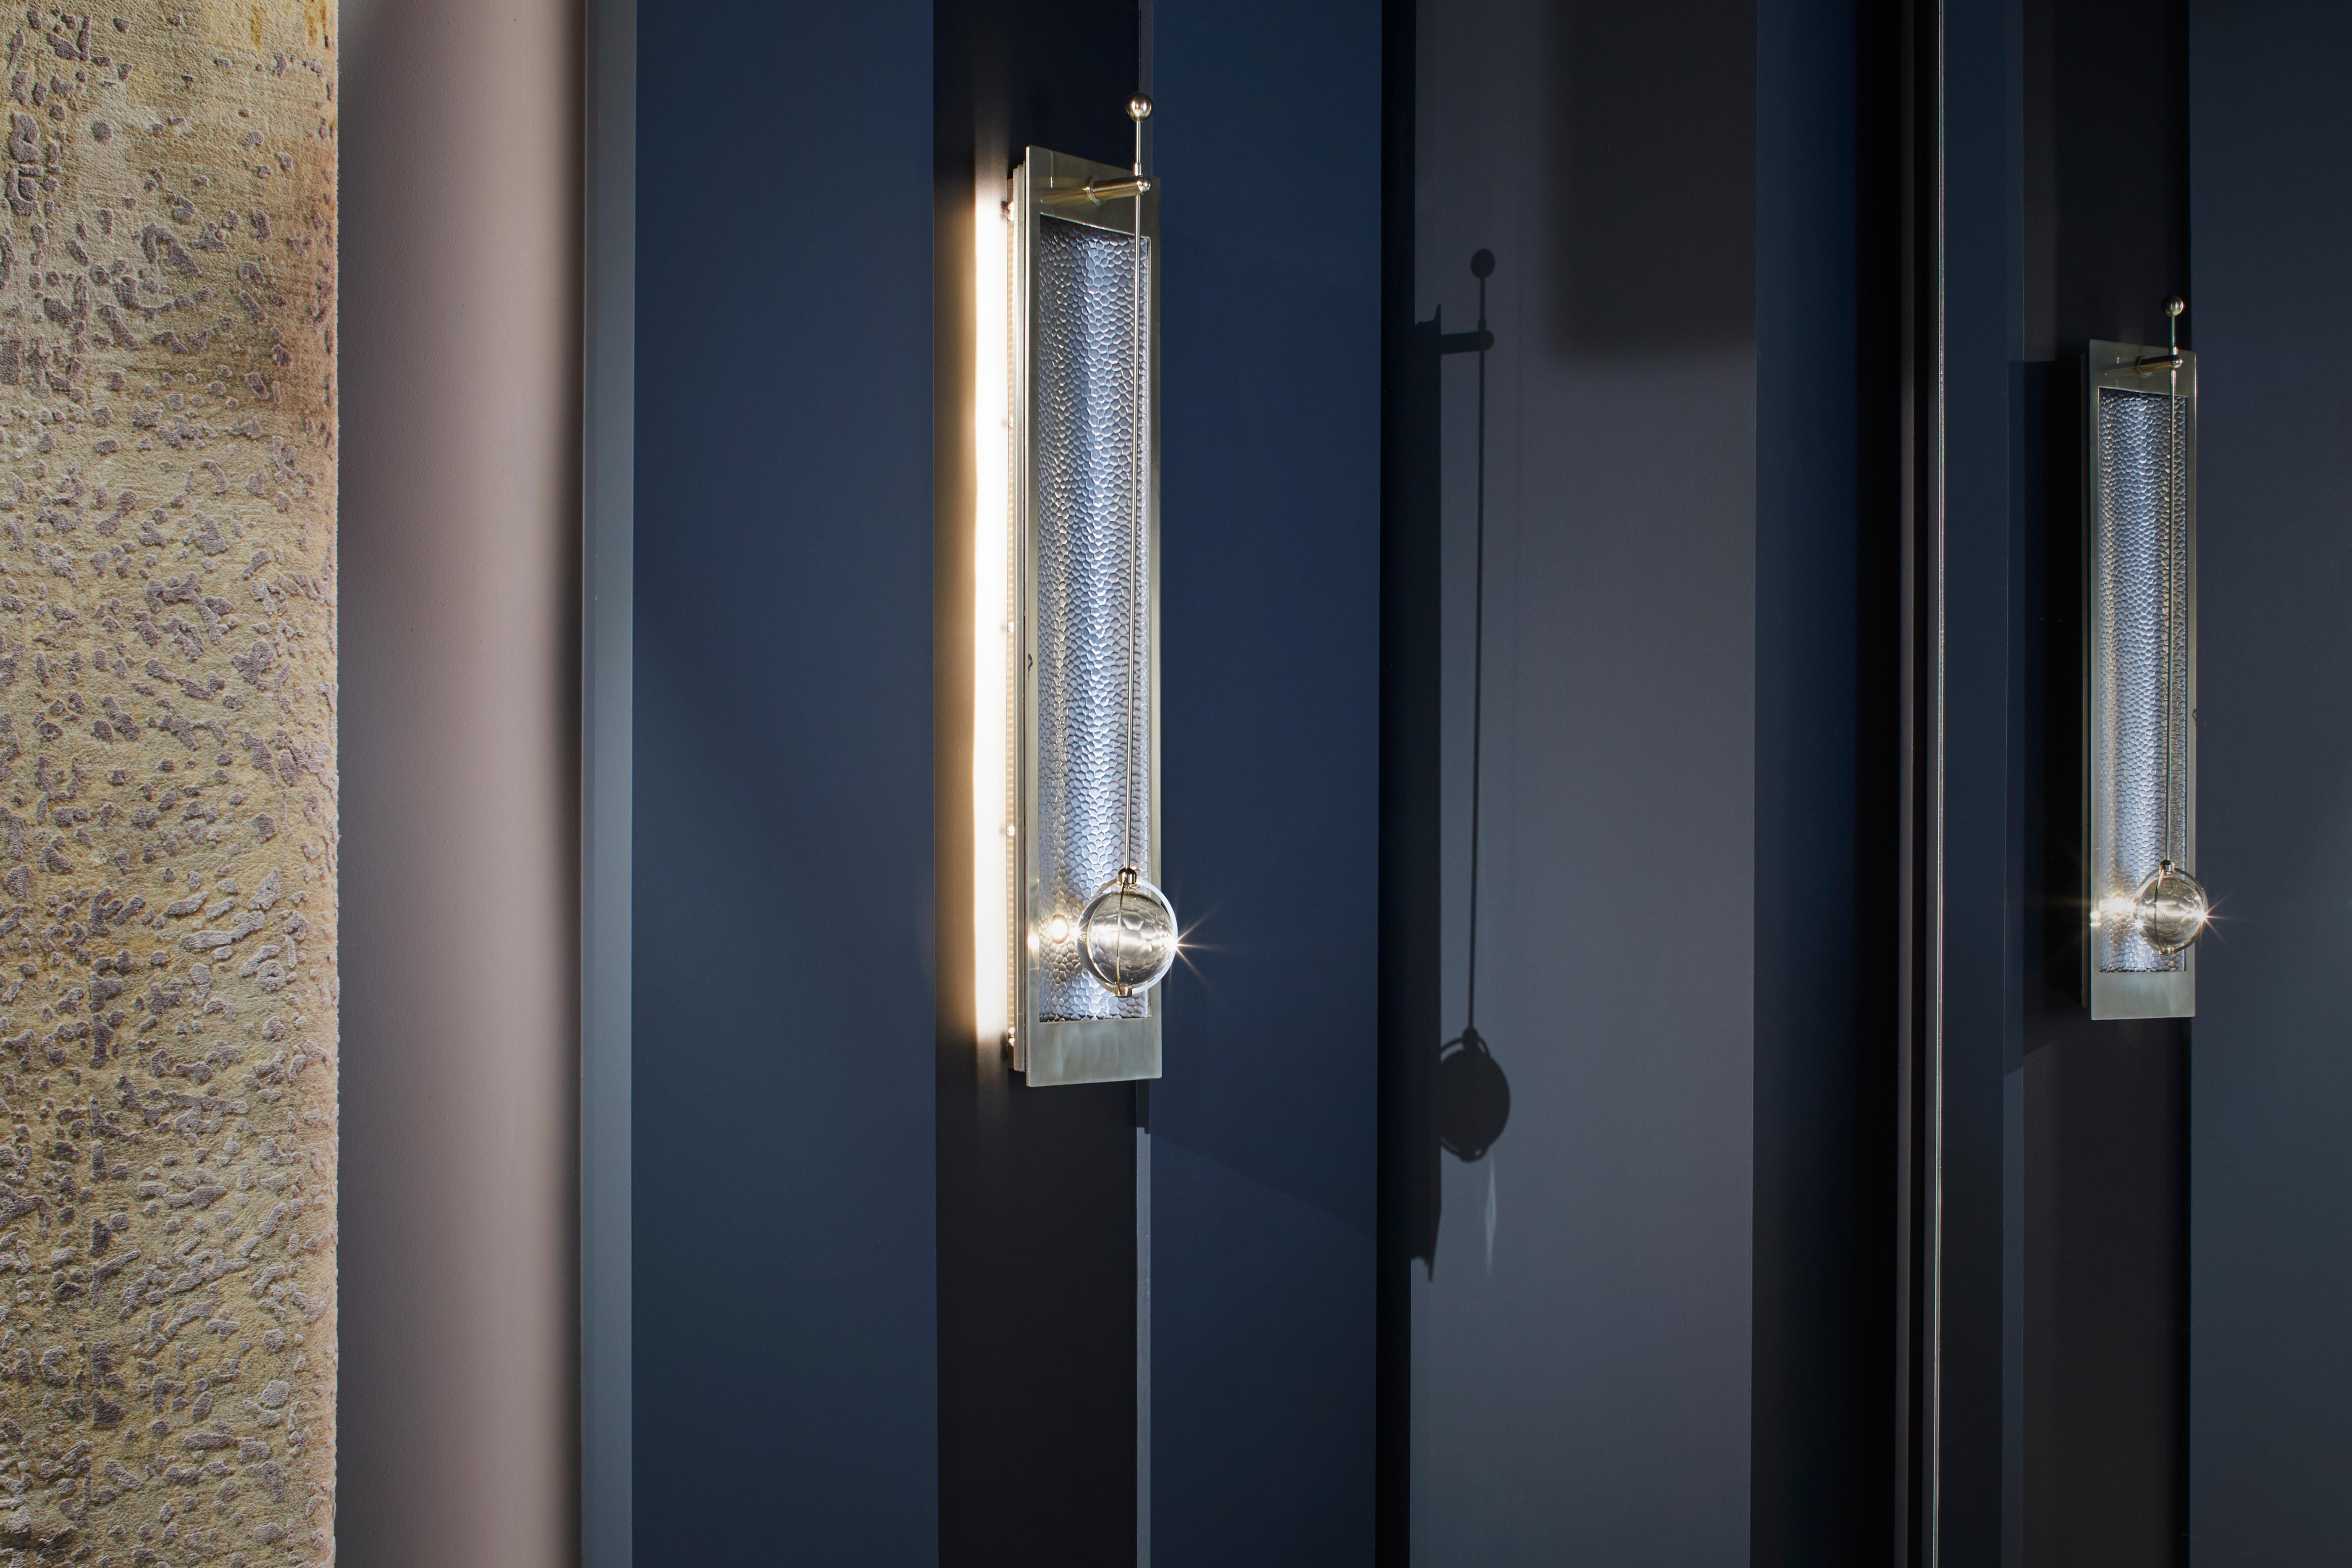 O&A London's Vega wall light is lighting design at its most refined. Crafted to accurately capture the beauty of light, this stunningly beautiful piece adds modern aesthetics and subtle distinction to any indoor space. Its lightweight glass sphere